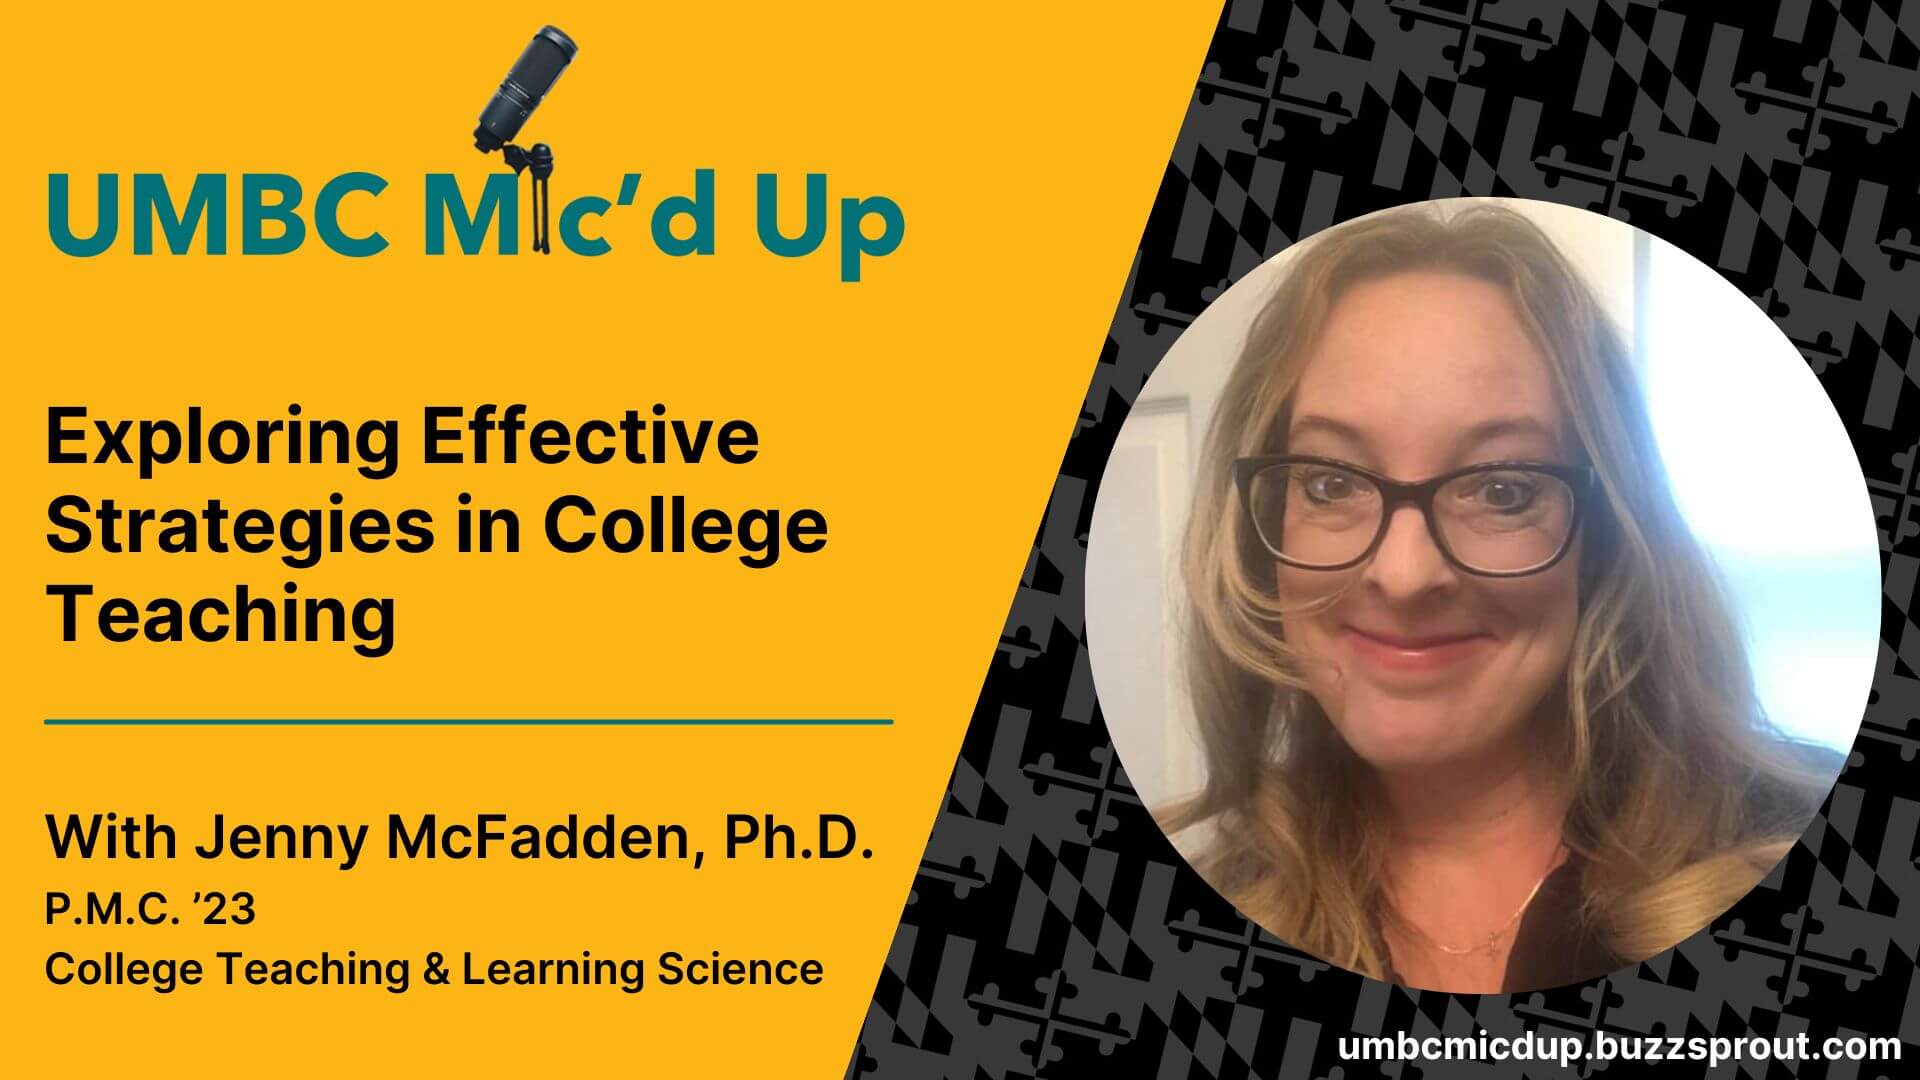 Jenny McFadden shares her experiences with UMBC MIc'd Up with teaching